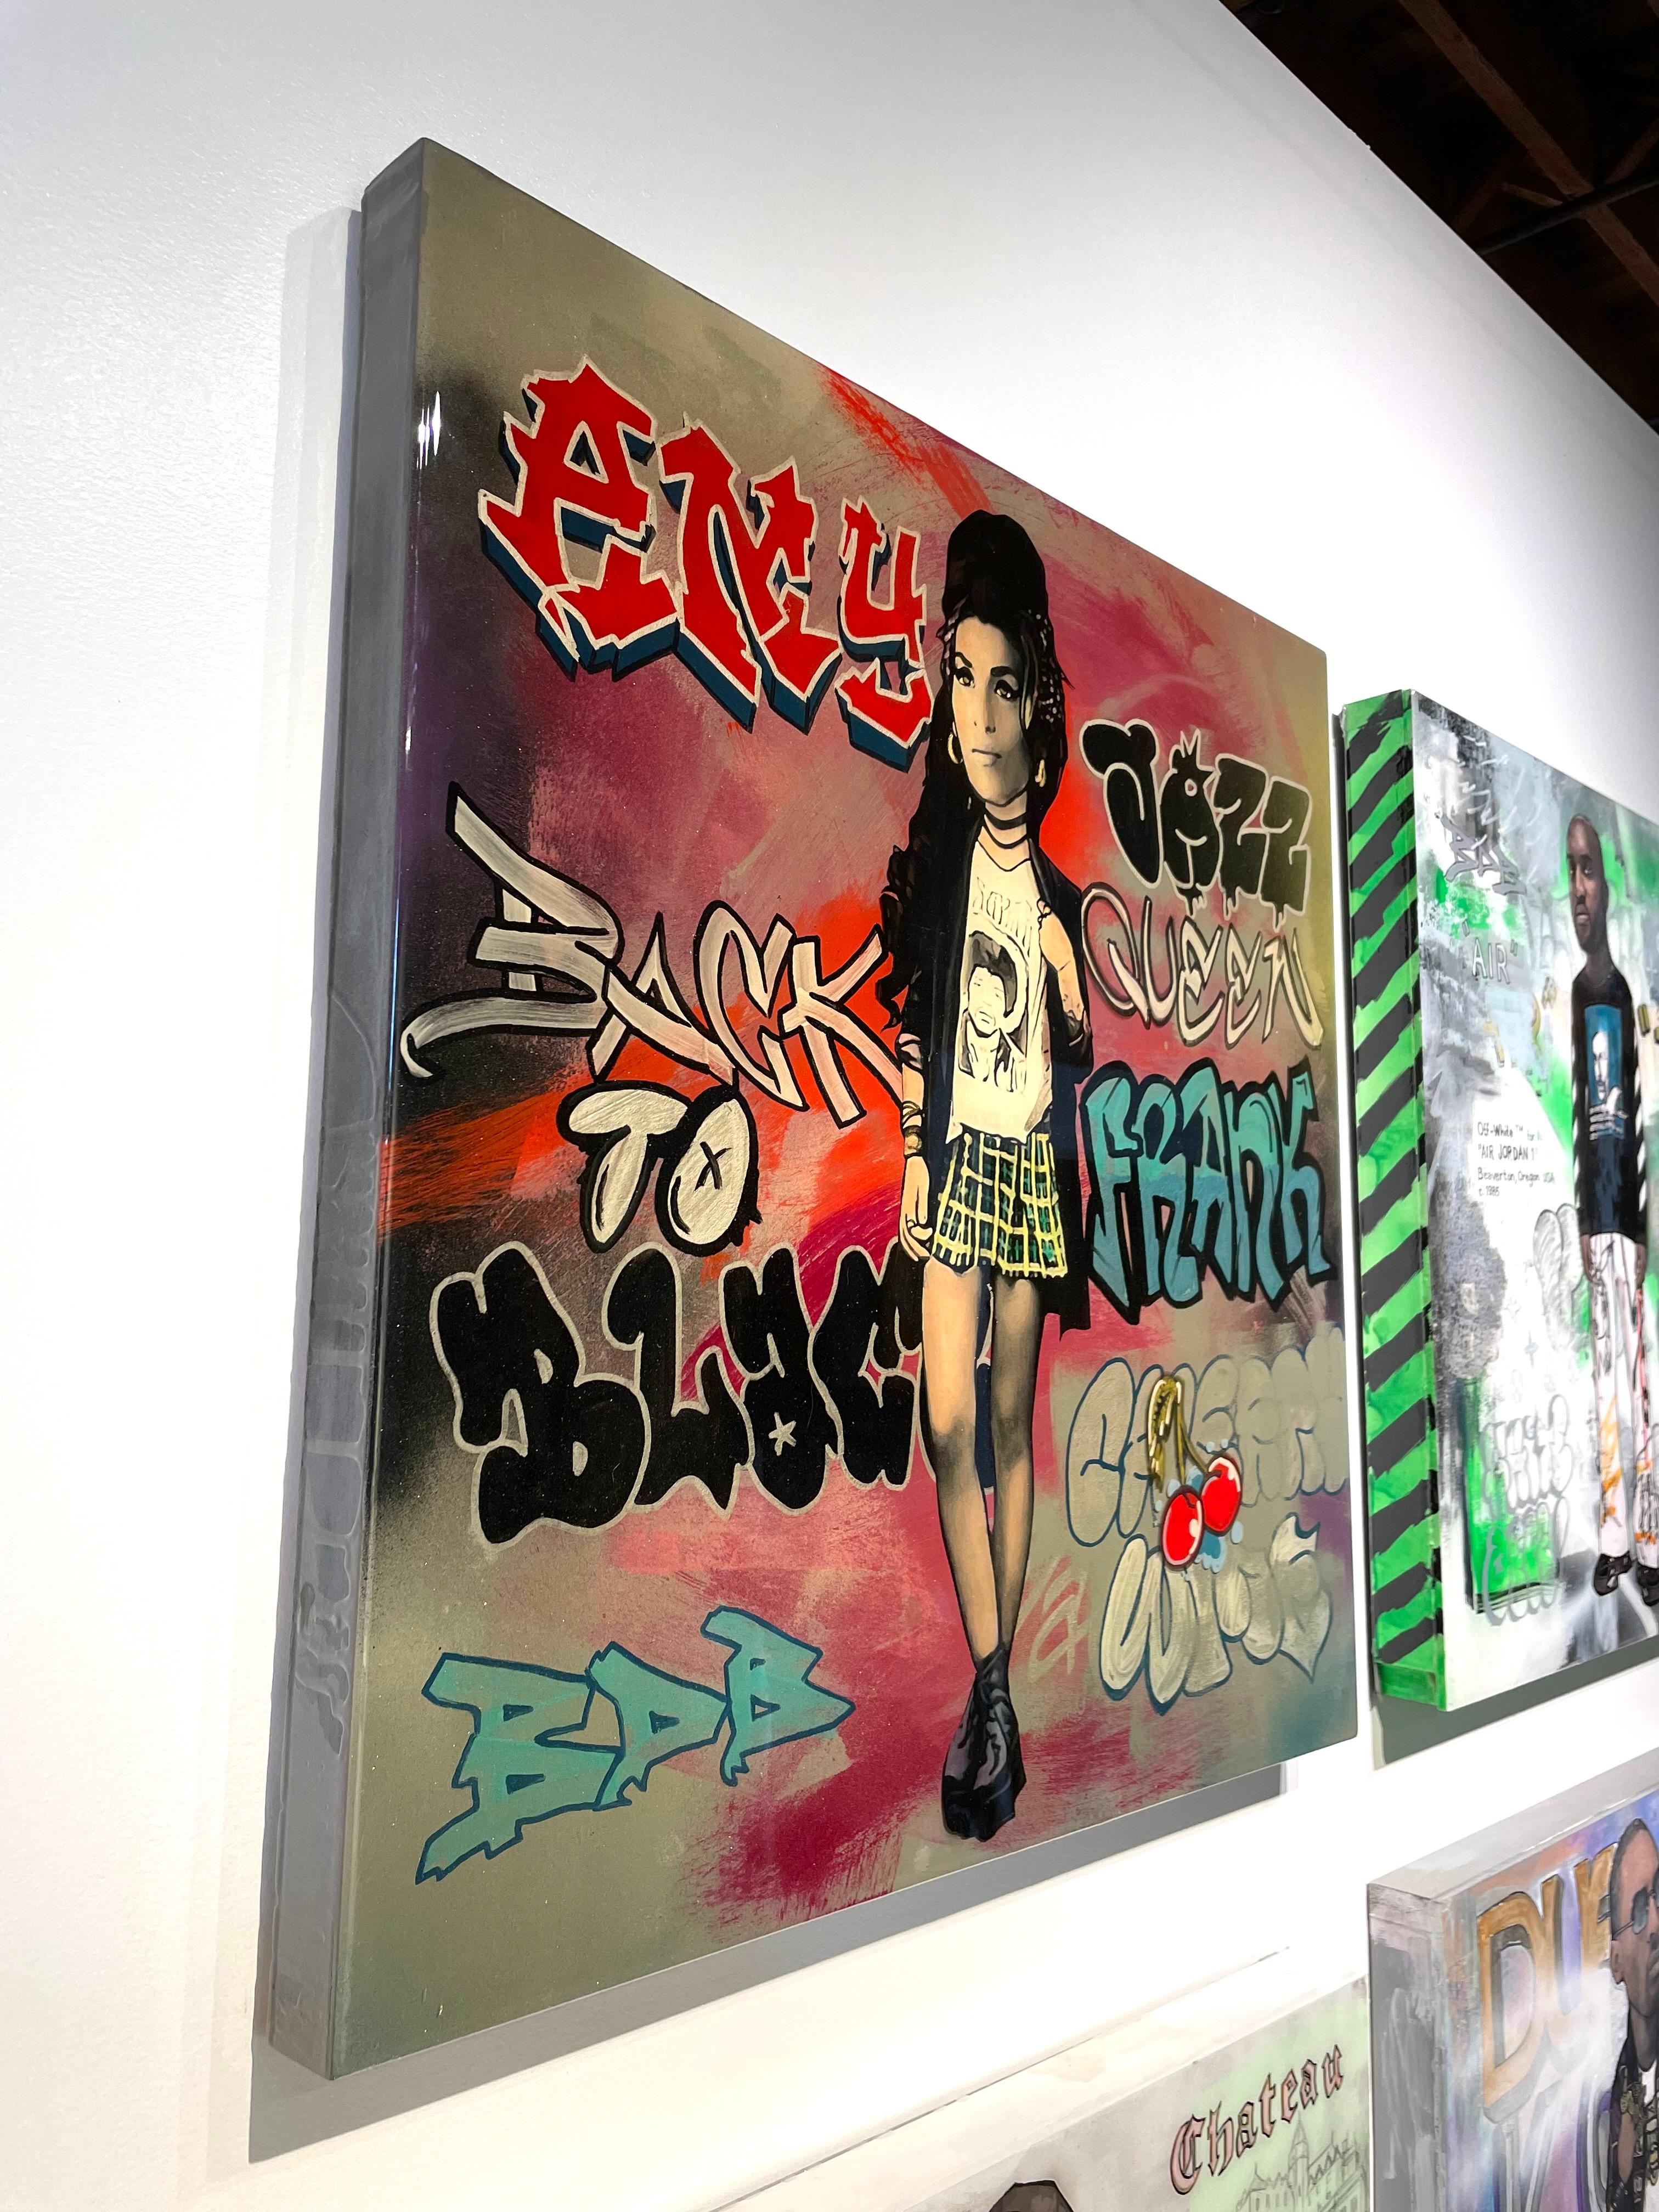 This original art work is Mixed Media - Acrylic and Enamel on Wood with a Resin Overlay, by The Producer BDB, featuring Amy Winehouse. 
Arrives Ready-to-Hang. Please Inquire for Additional Details. 

The Producer BDB creates original art of pop